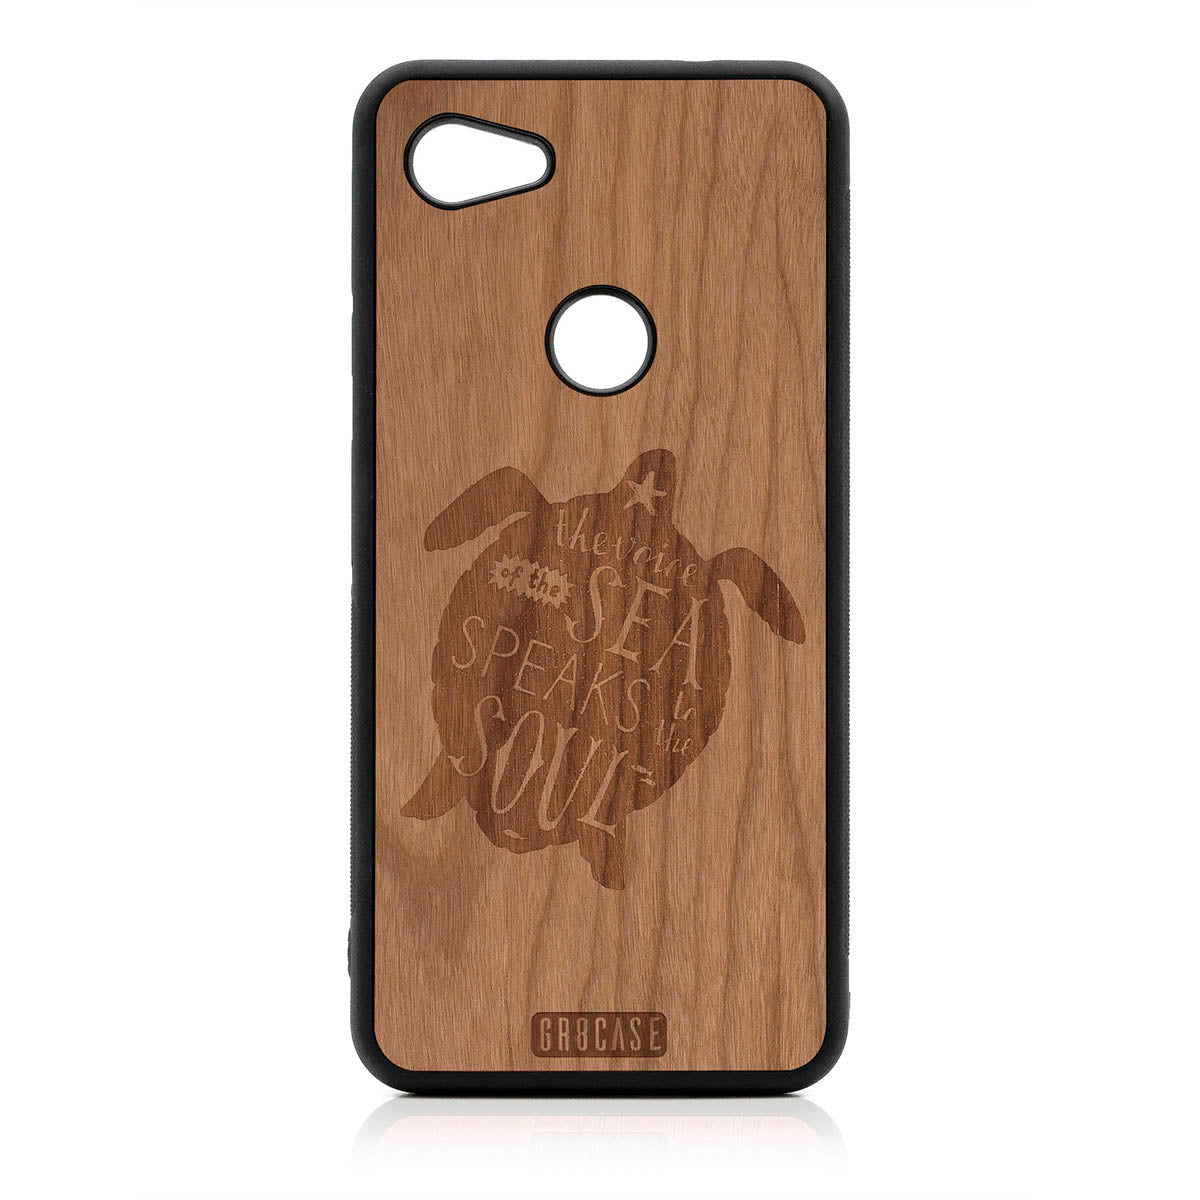 The Voice Of The Sea Speaks To The Soul (Turtle) Design Wood Case For Google Pixel 3A